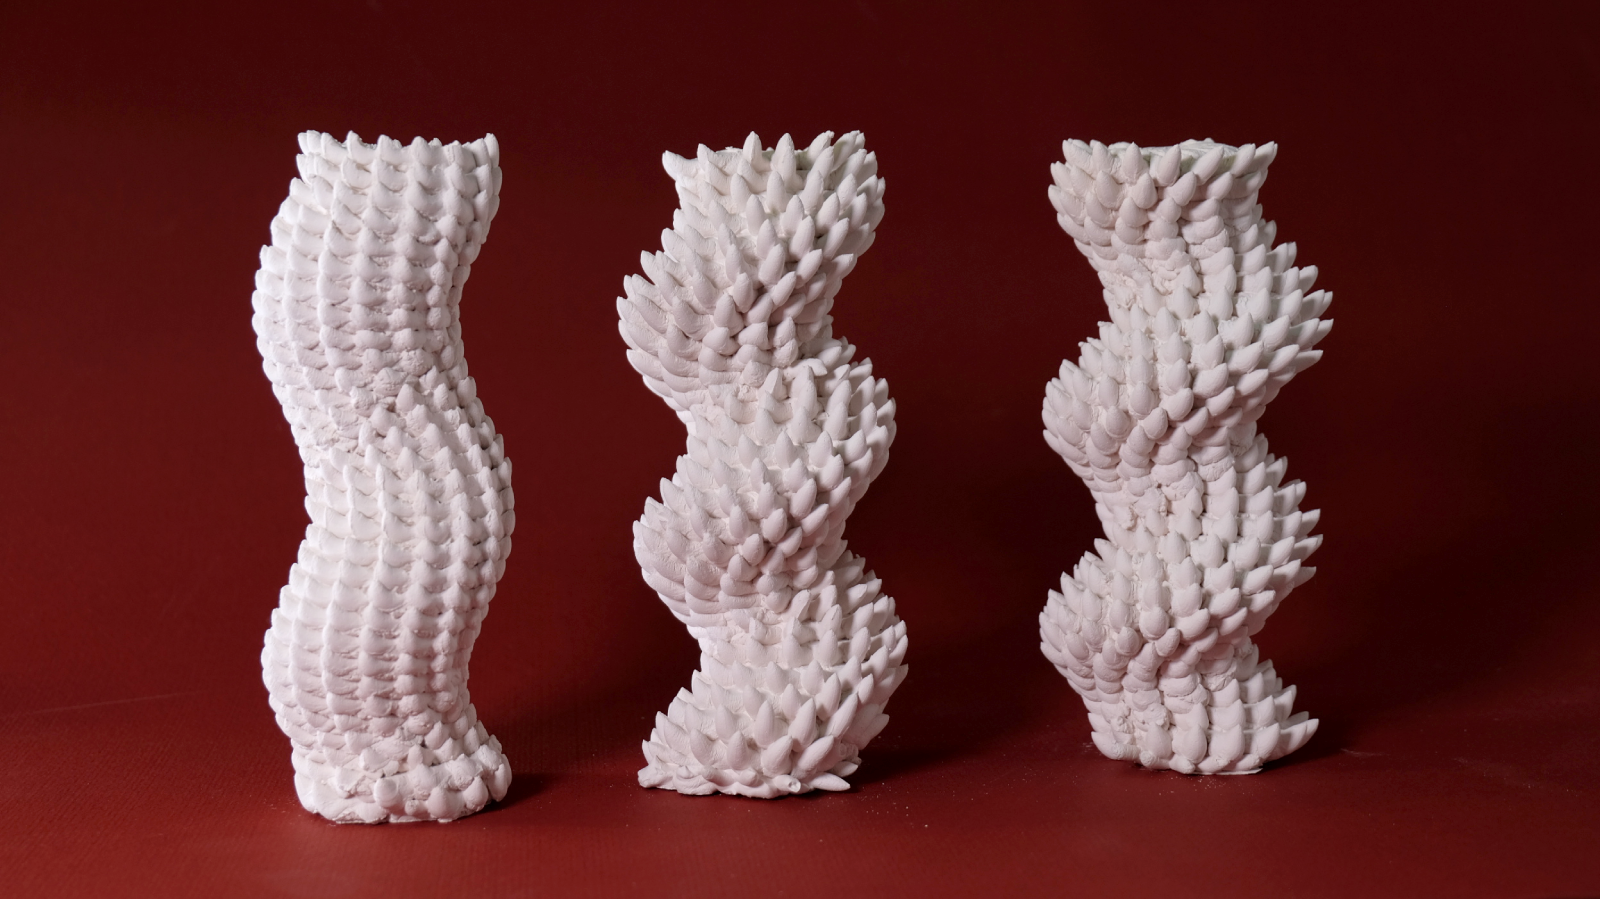 3 porcelain pieces, all tubular, but with different degrees of coiling and spikiness in their texture.